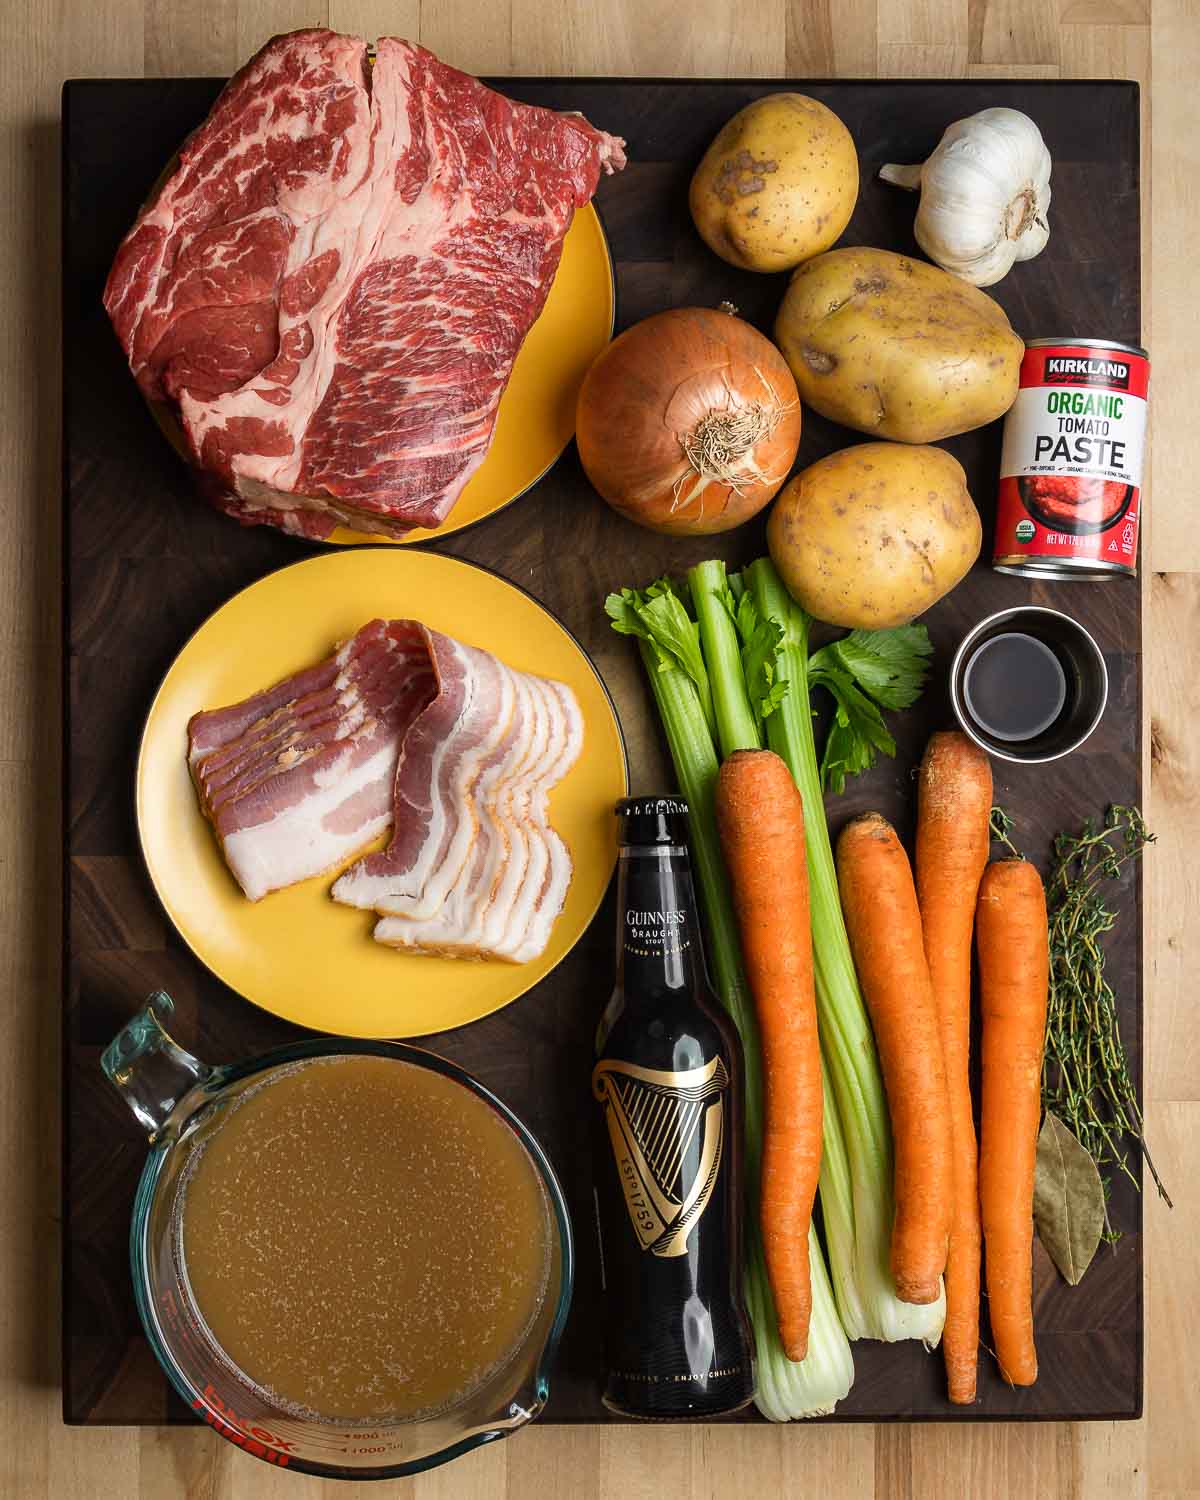 Ingredients shown: beef chuck, onion, potatoes, garlic, tomato paste, bacon, beef stock, Guinness, celery carrots, herbs, and Worcestershire sauce.